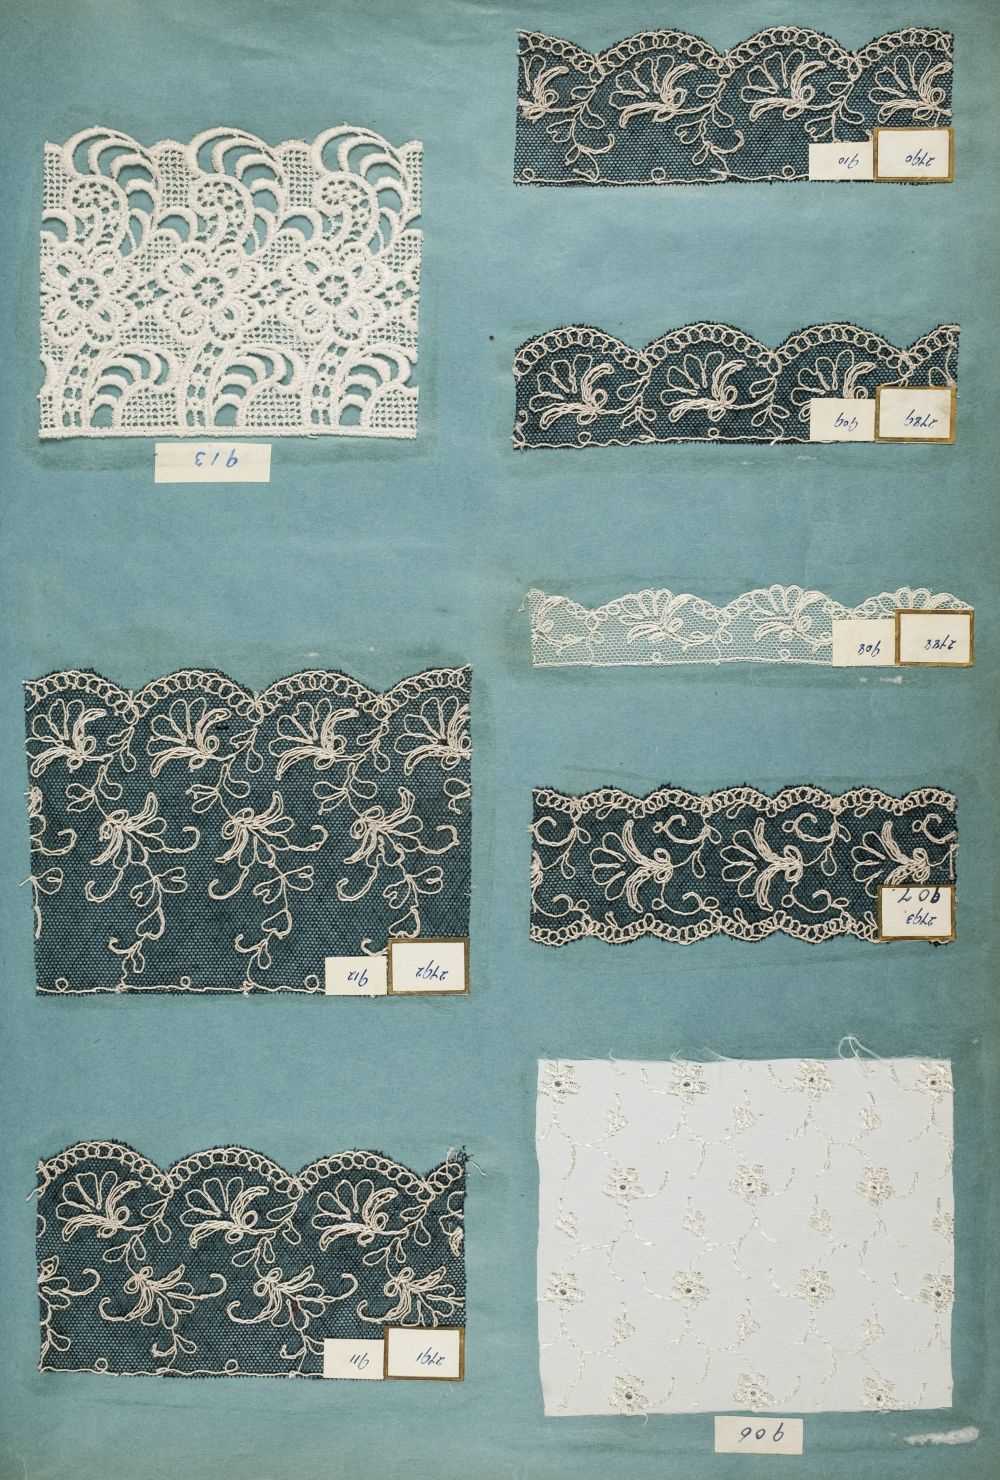 Lot 188 - Sample Books. A collection of three large books of lace and fabric samples, 1949-1957